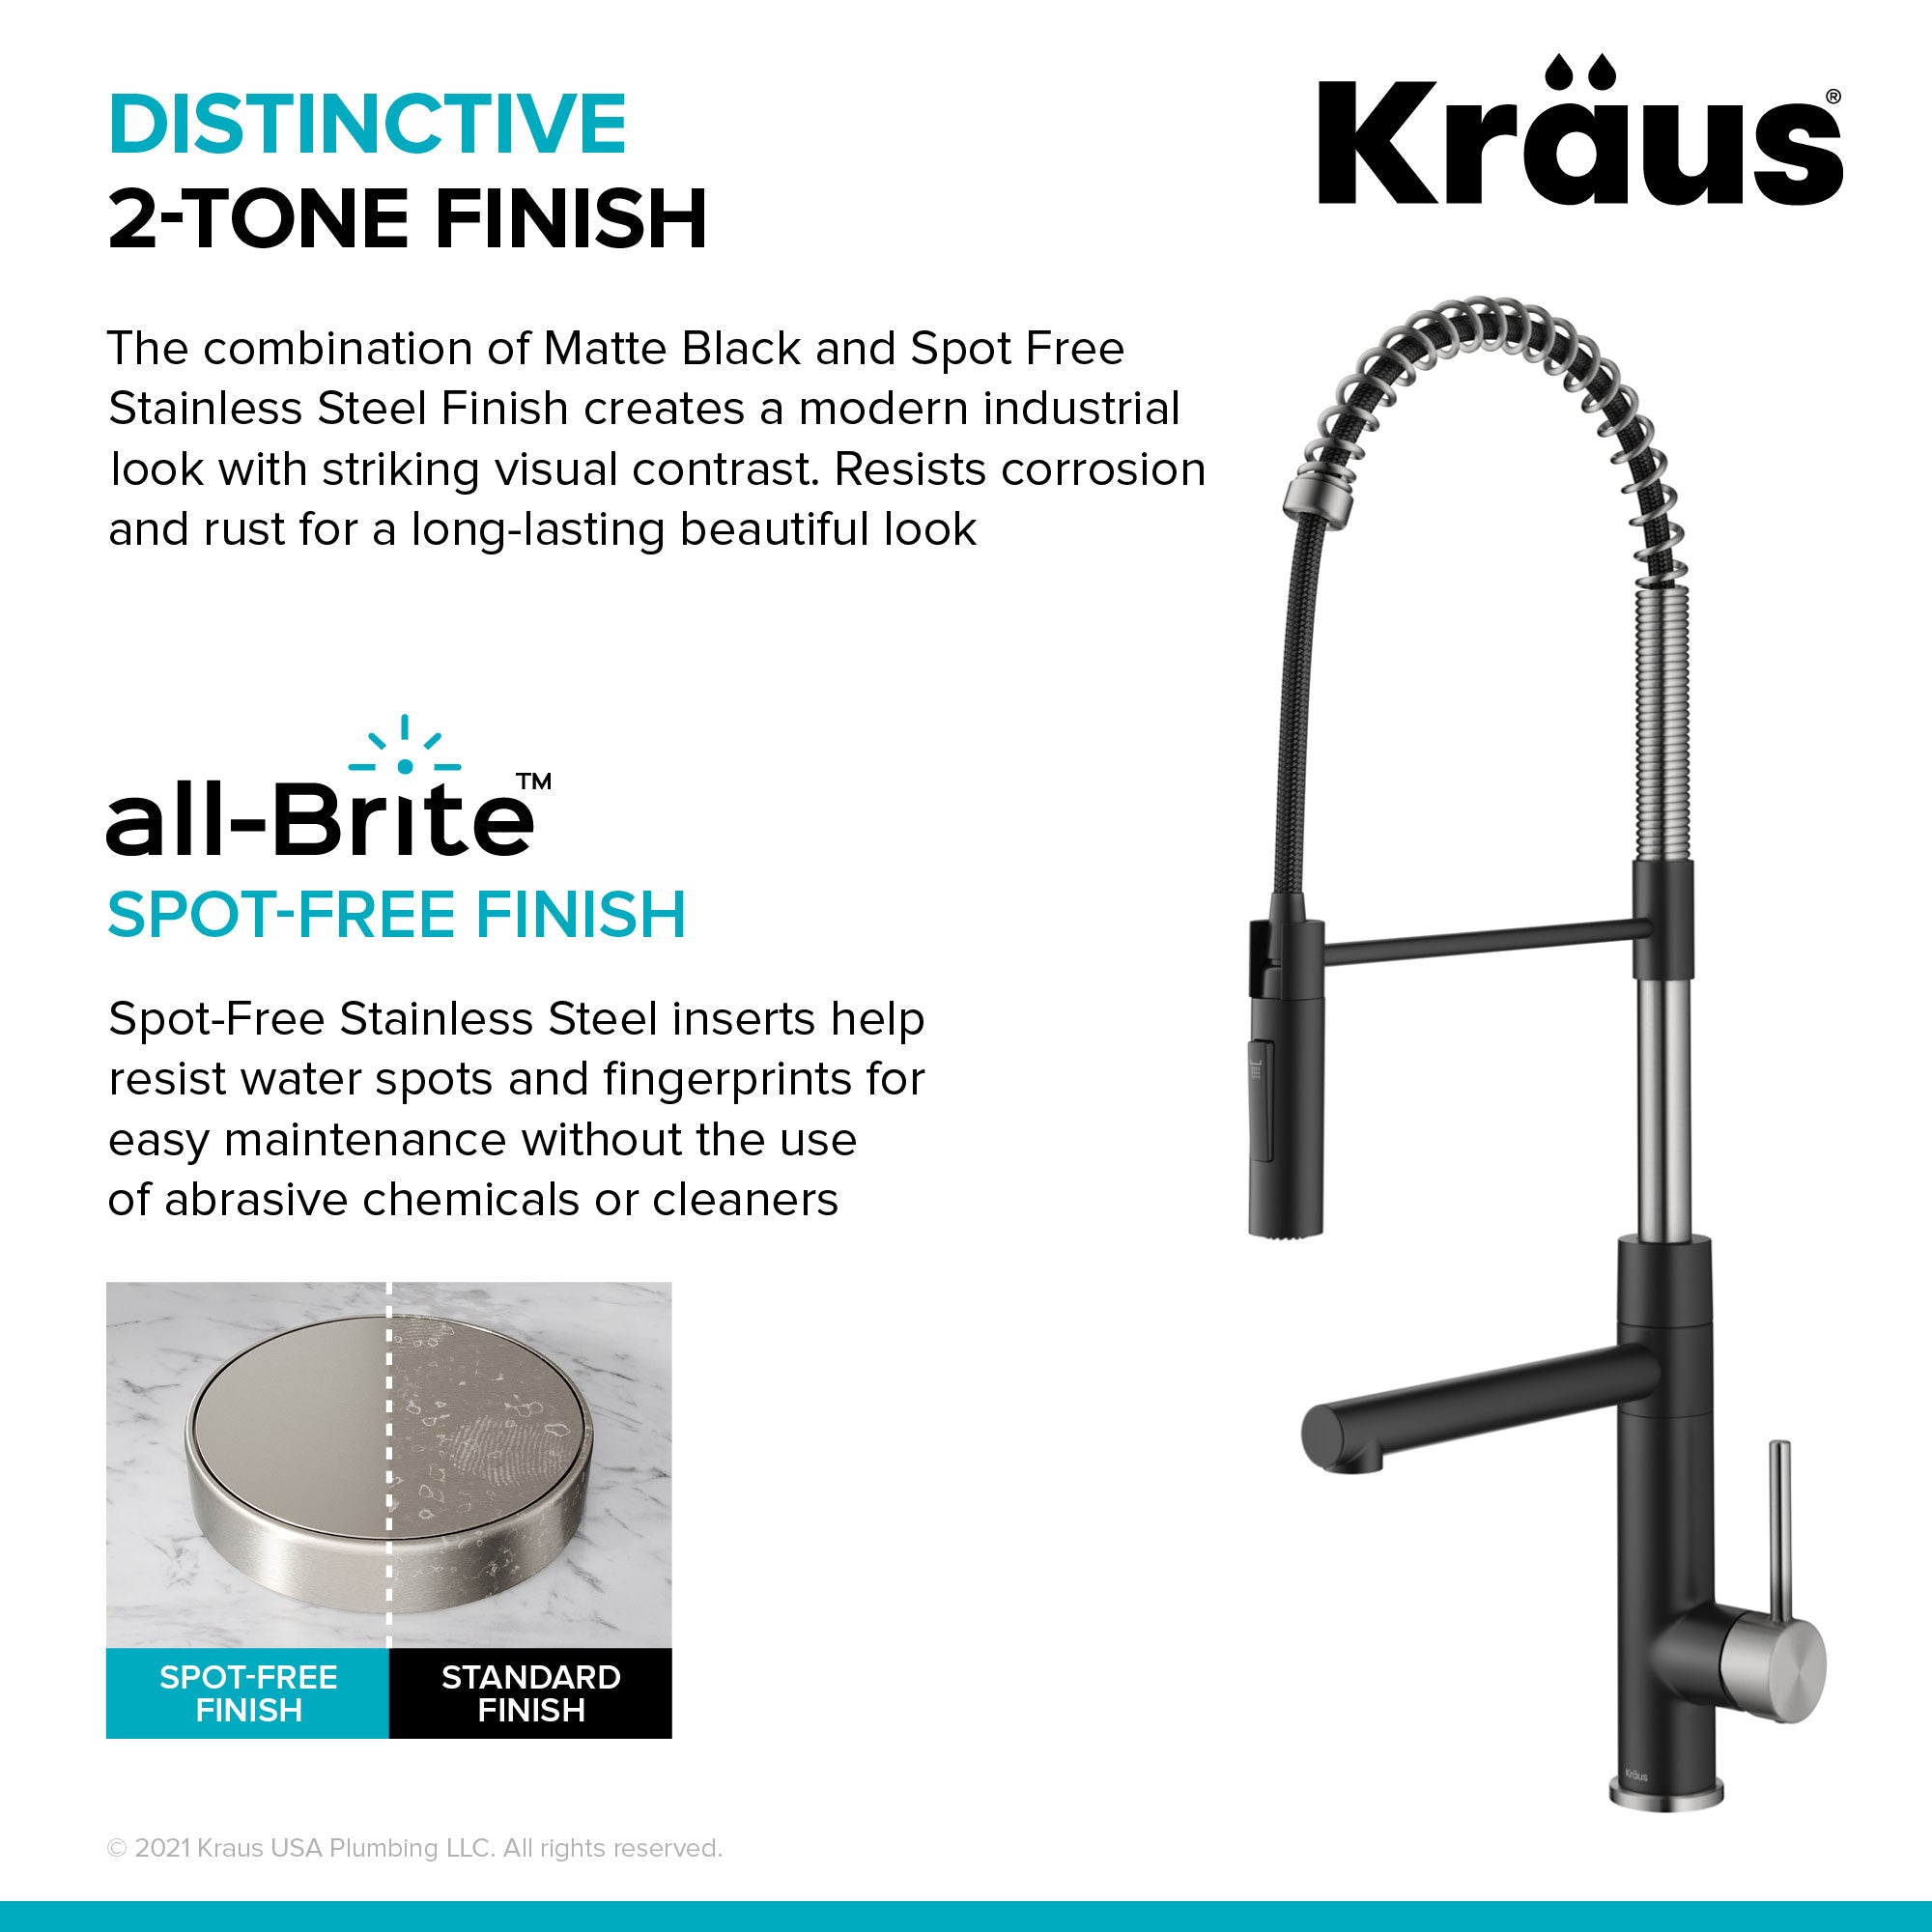 KRAUS Artec Pro Commercial Style Single Handle Kitchen Faucet with Pot Filler in Spot Free Stainless Steel / Matte Black-Kitchen Faucets-DirectSinks